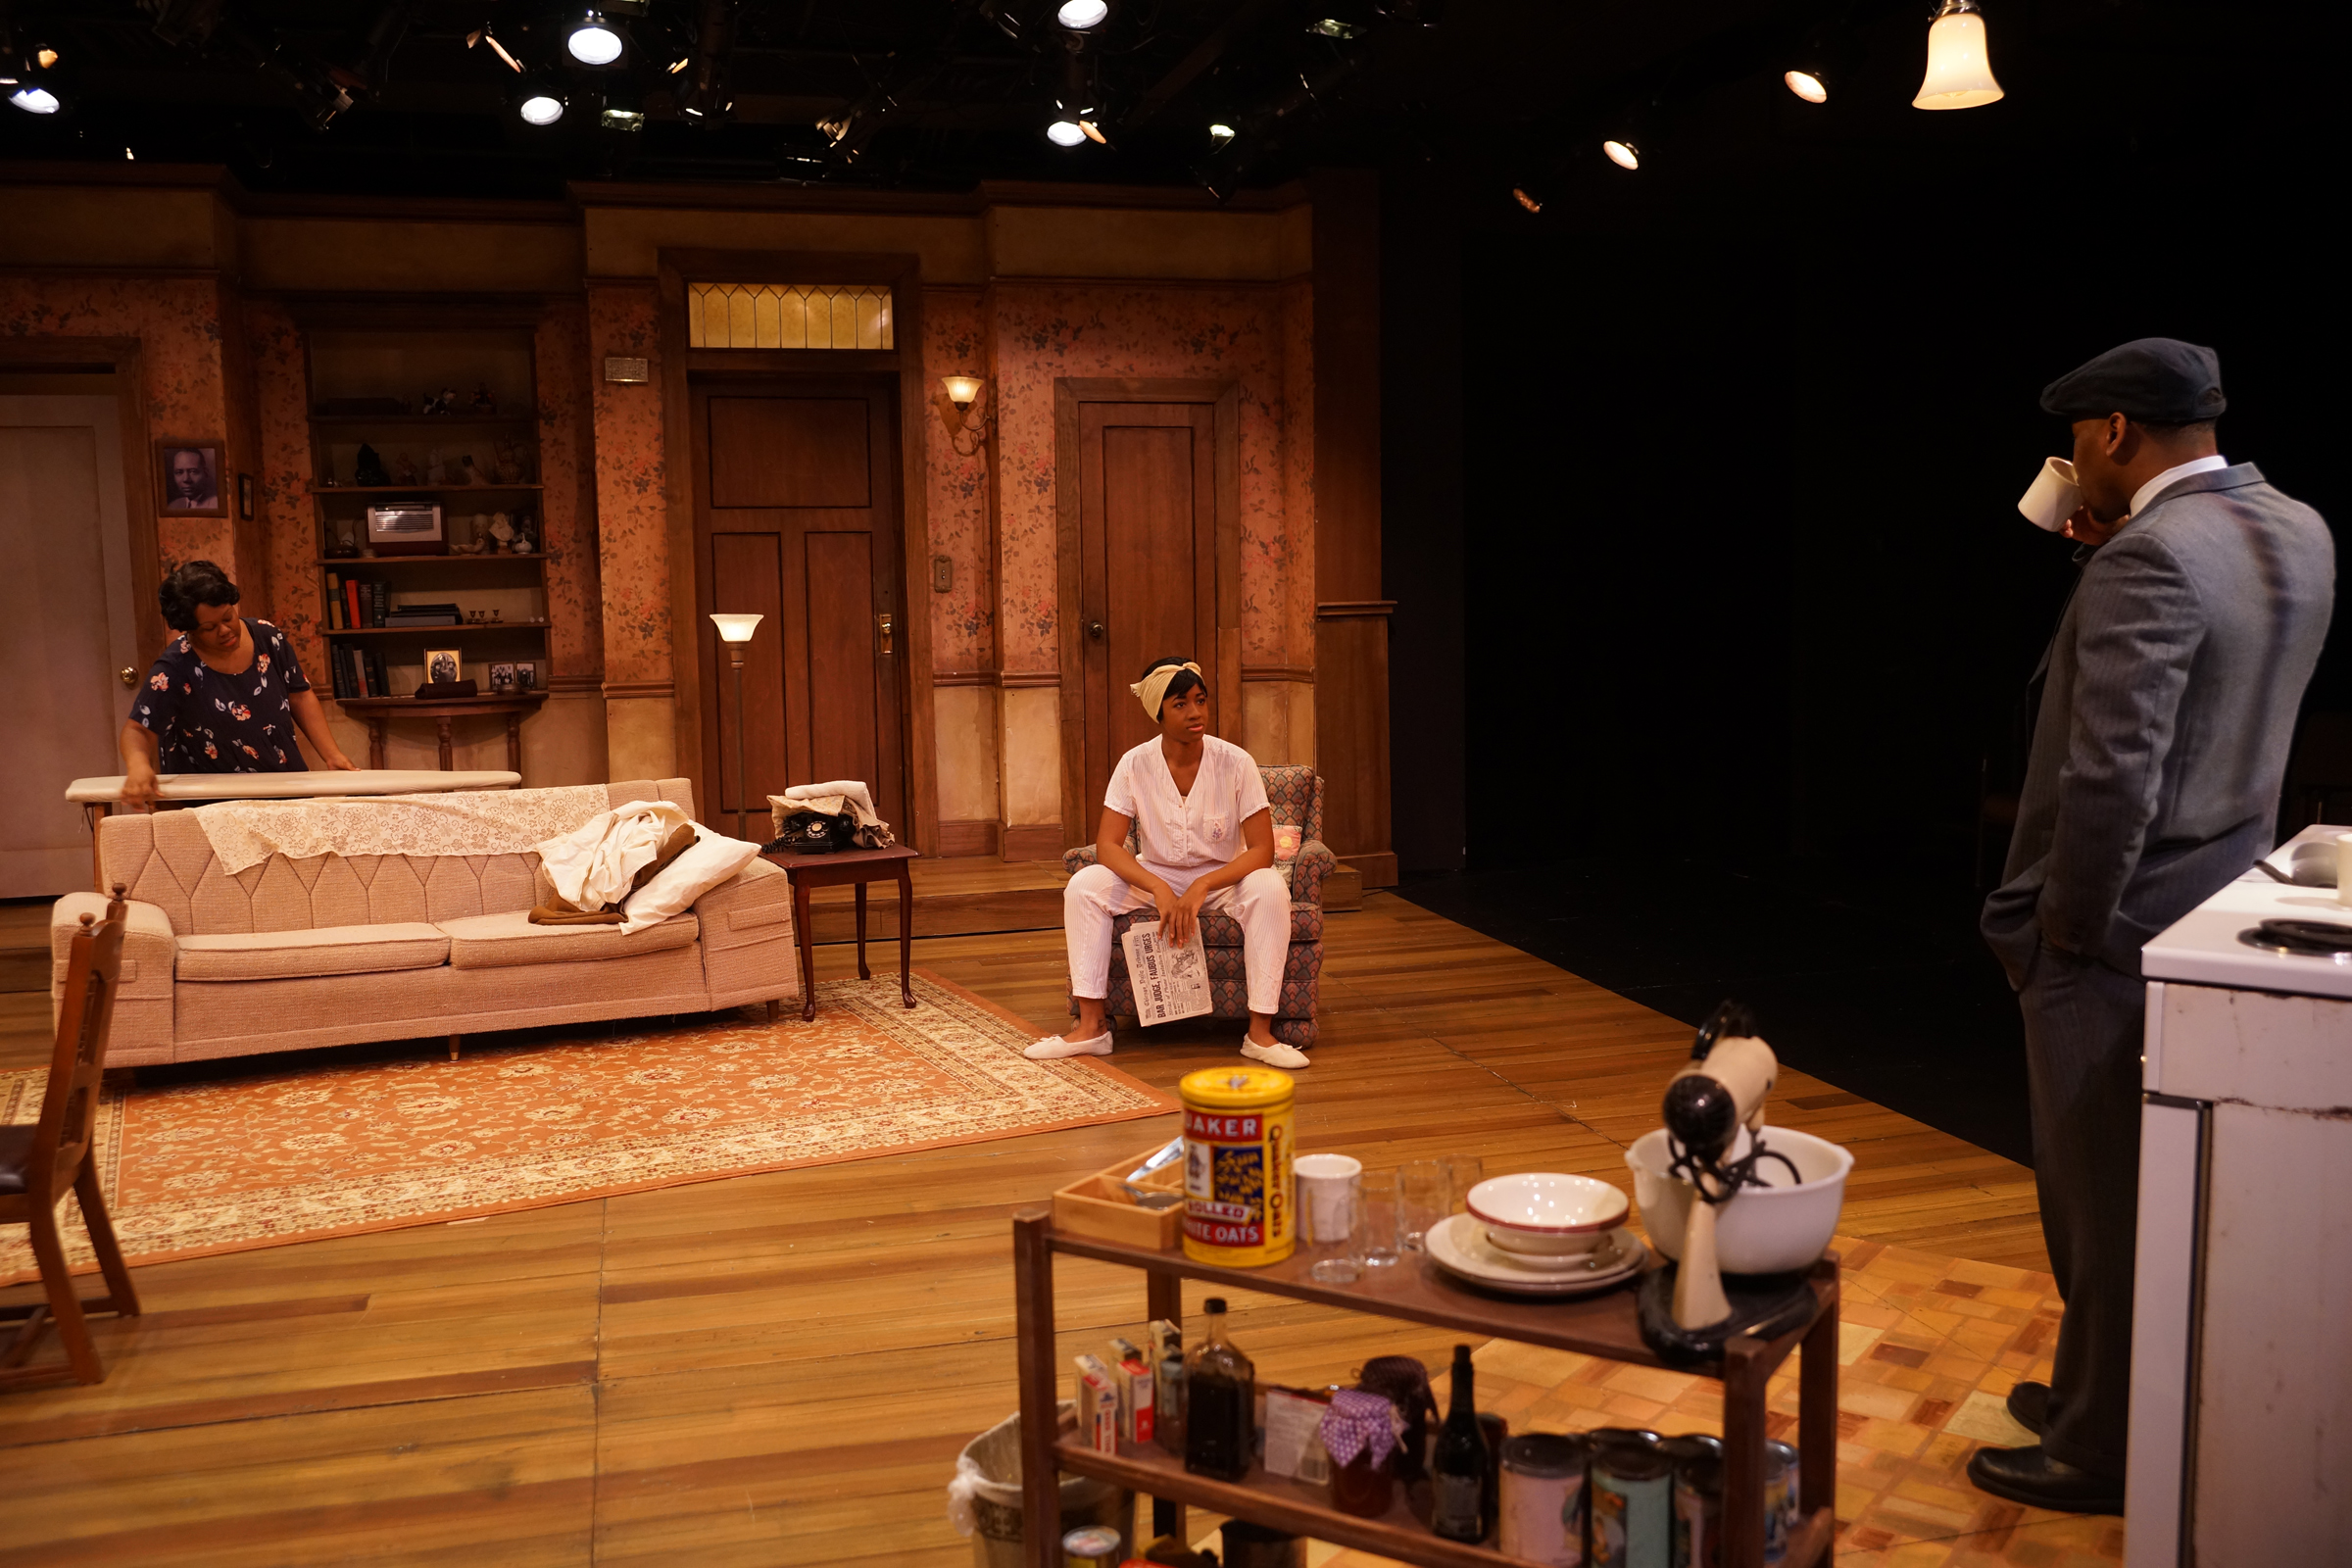   Beneatha Younger  . A Raisin in the Sun.  Park Square Theatre. Photos by Patronella J Ytsma.    